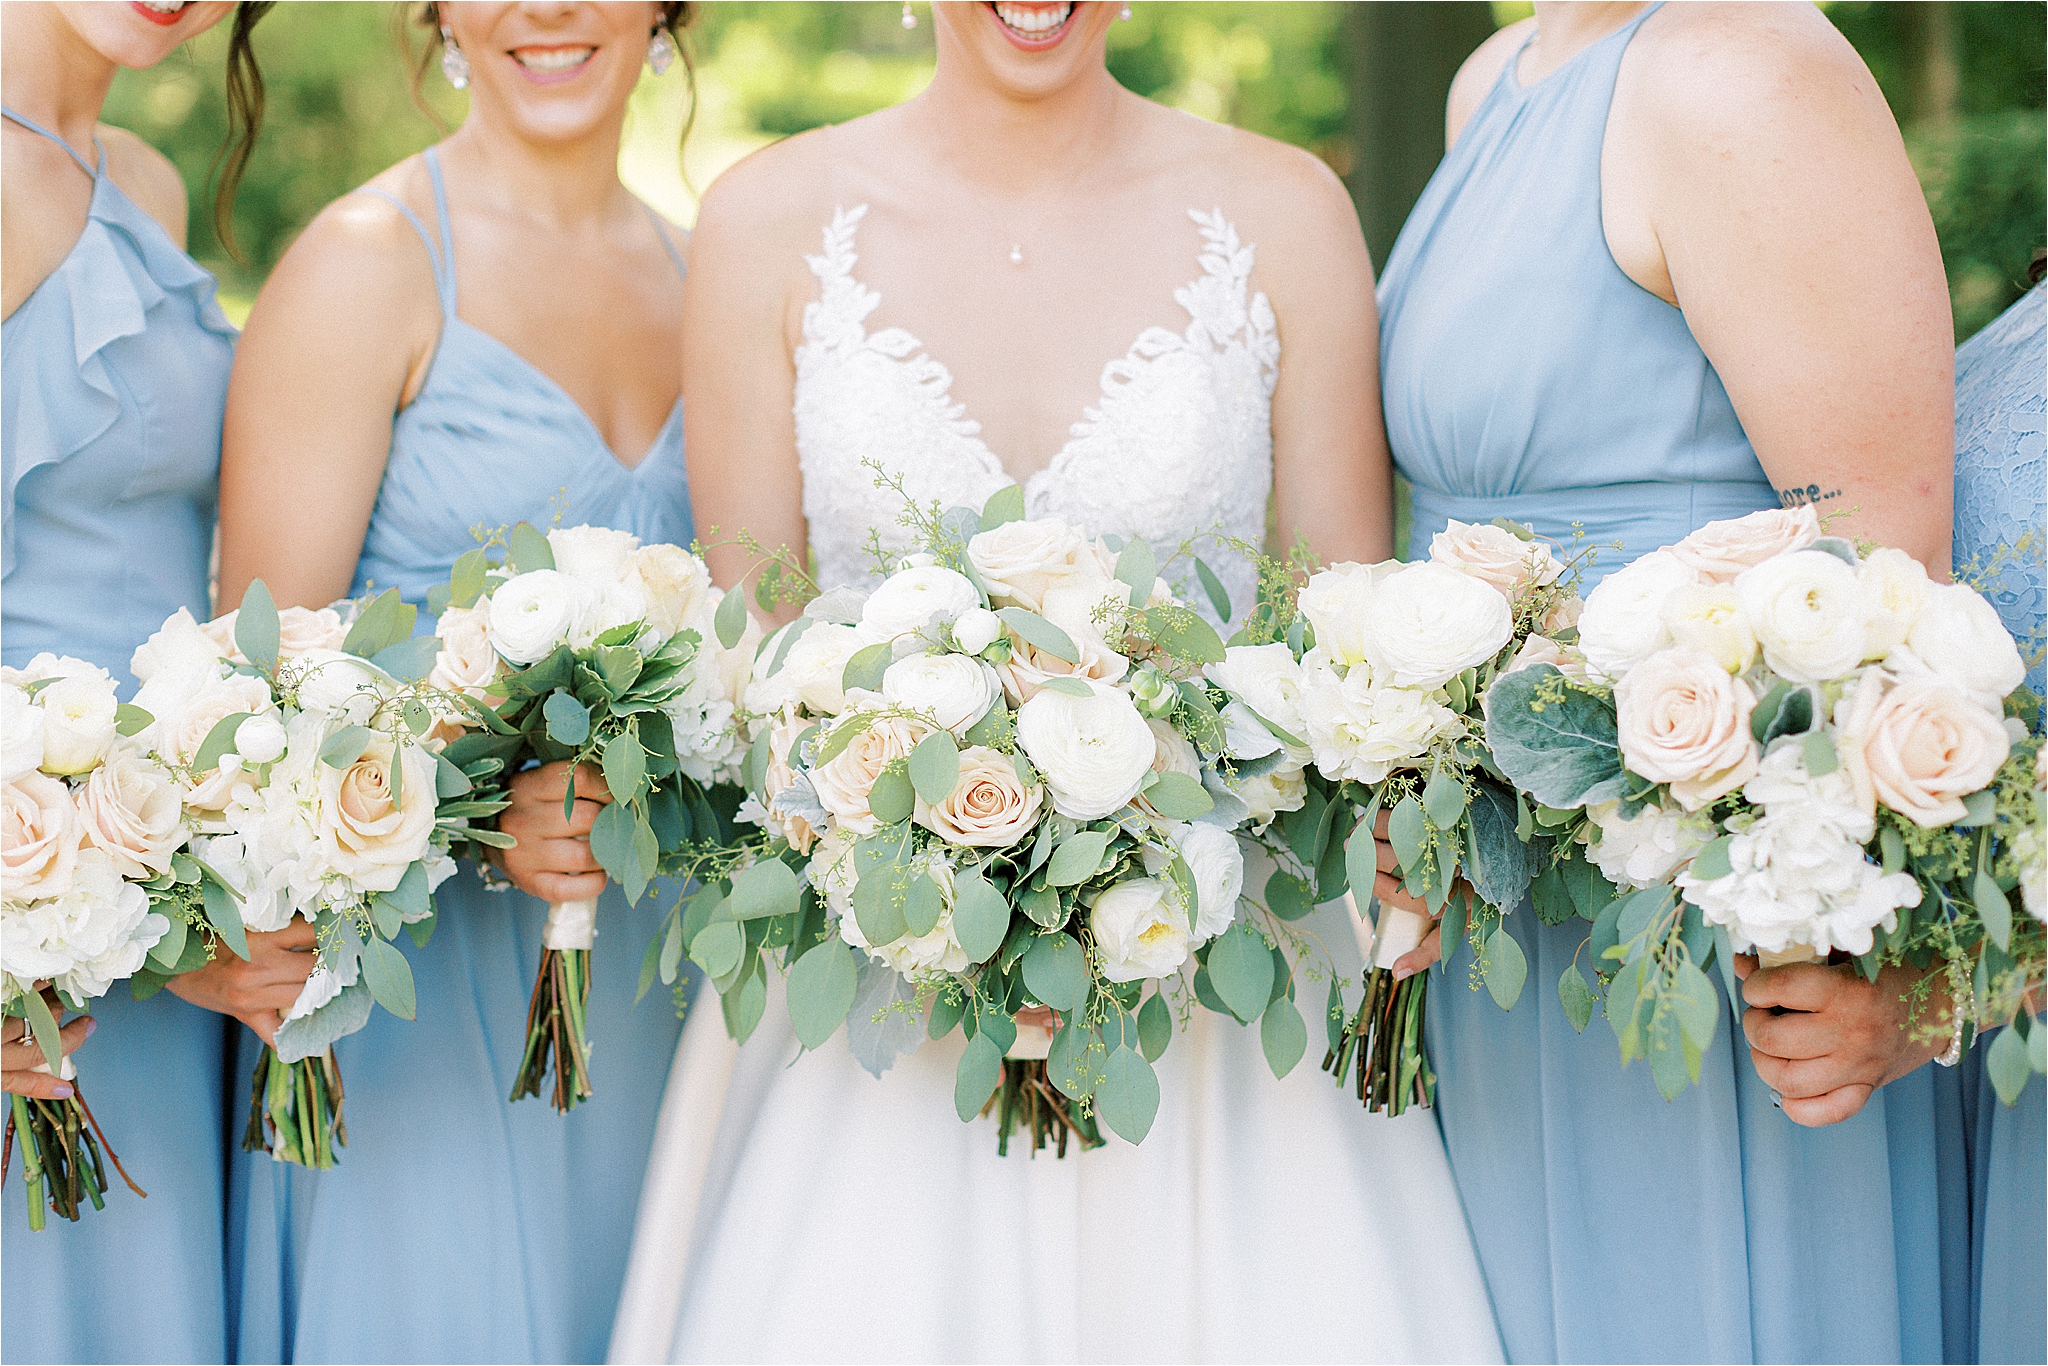 light pink, white, and green bouquets with light blue bridesmaid dresses